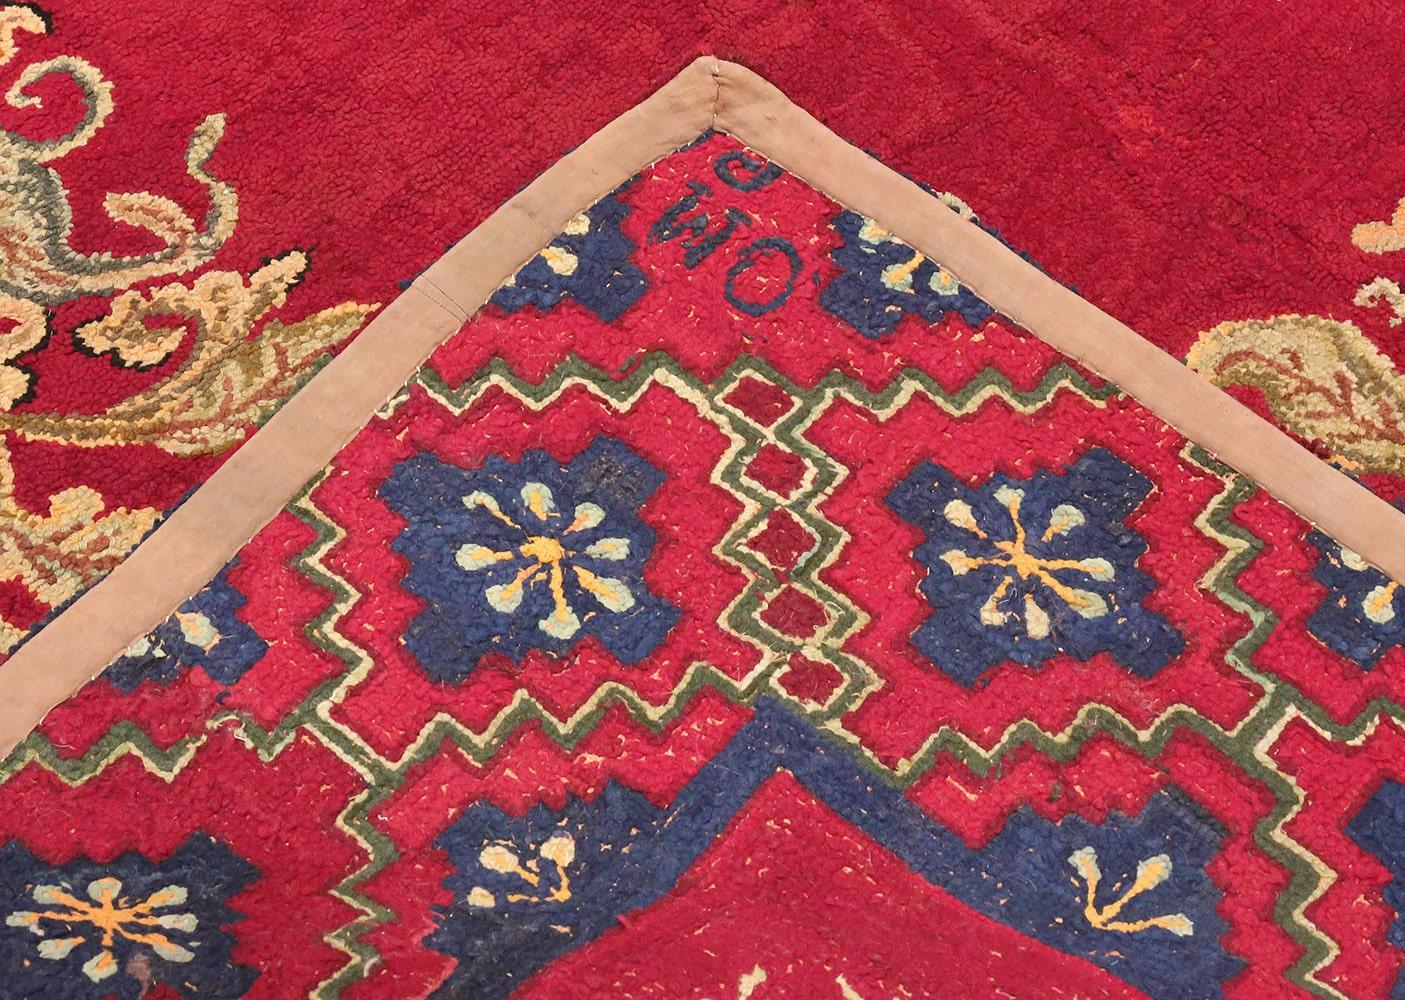 20th Century Room Size Red Antique American Hooked Rug. Size: 9 ft x 12 ft 3 in